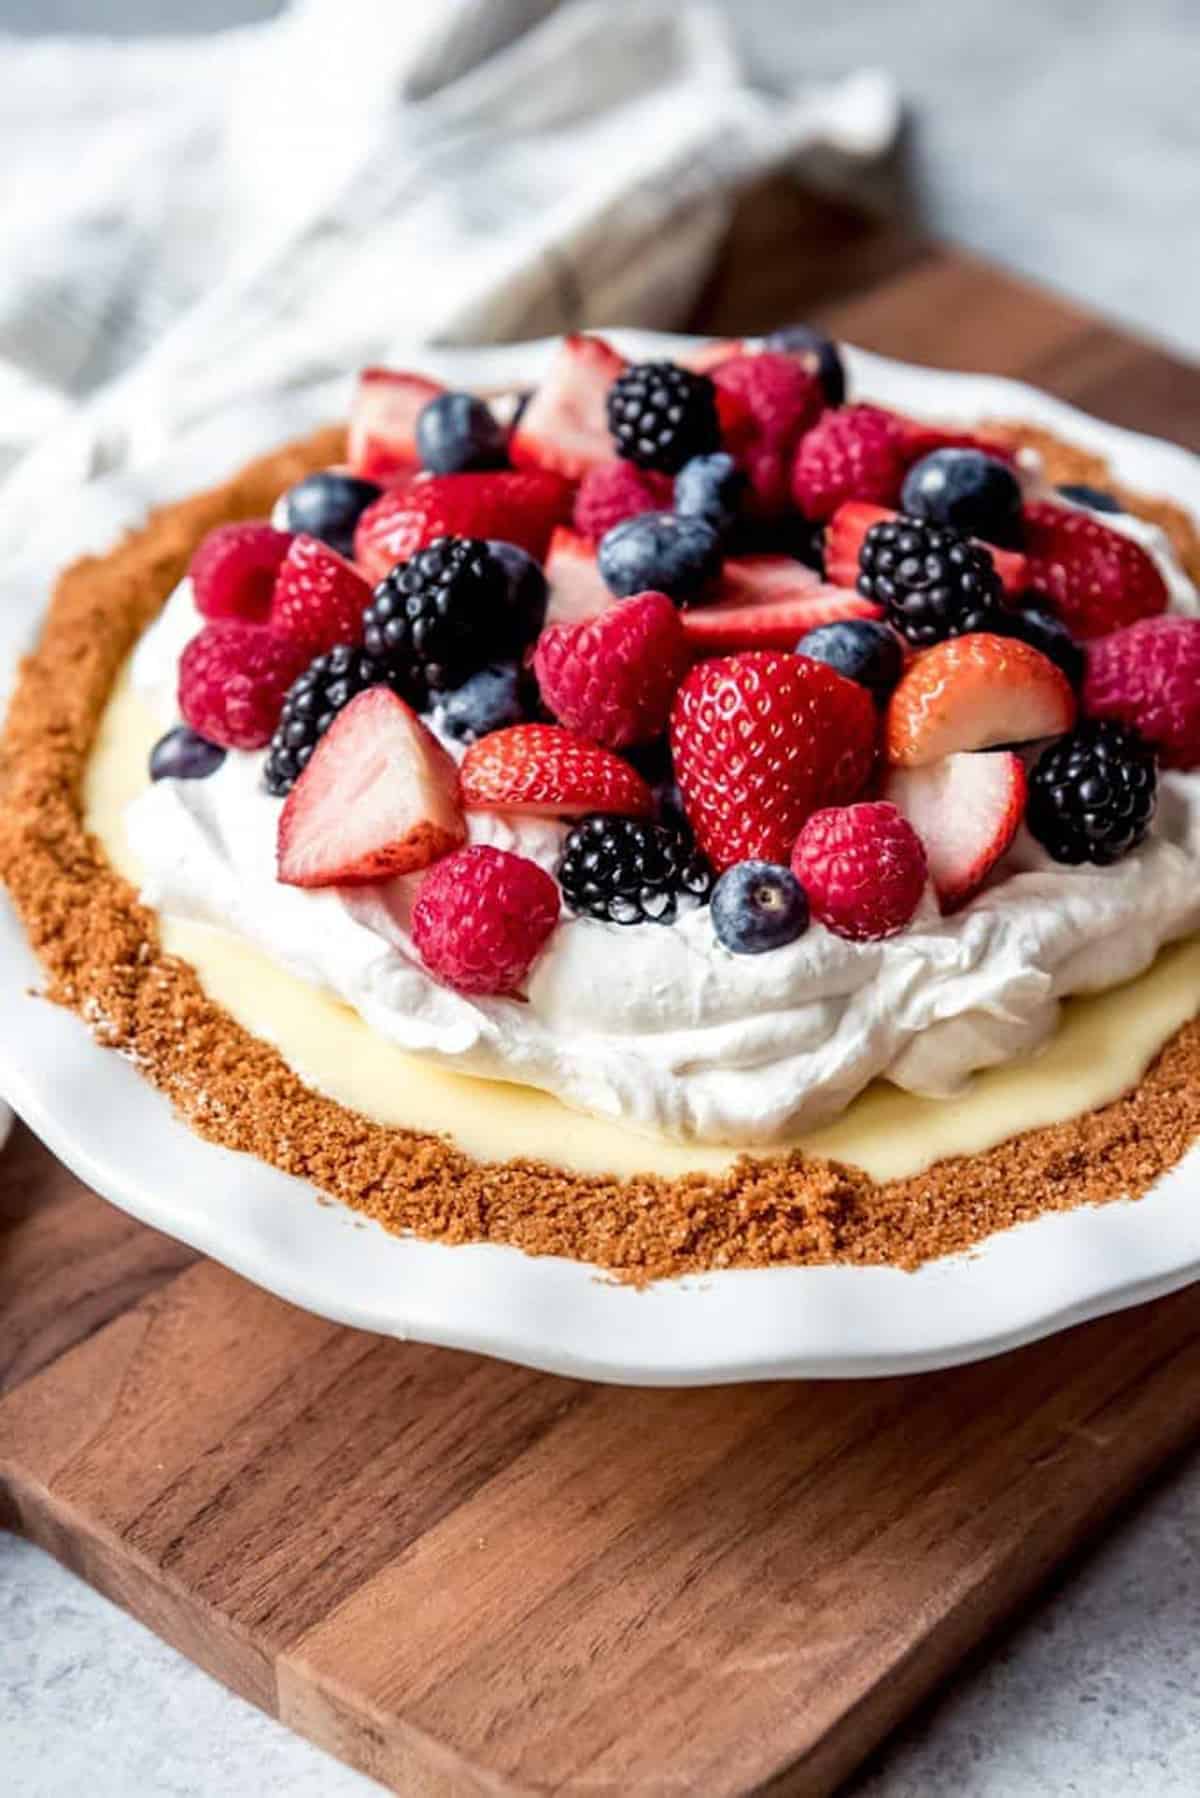 Cream pie with berries on top.